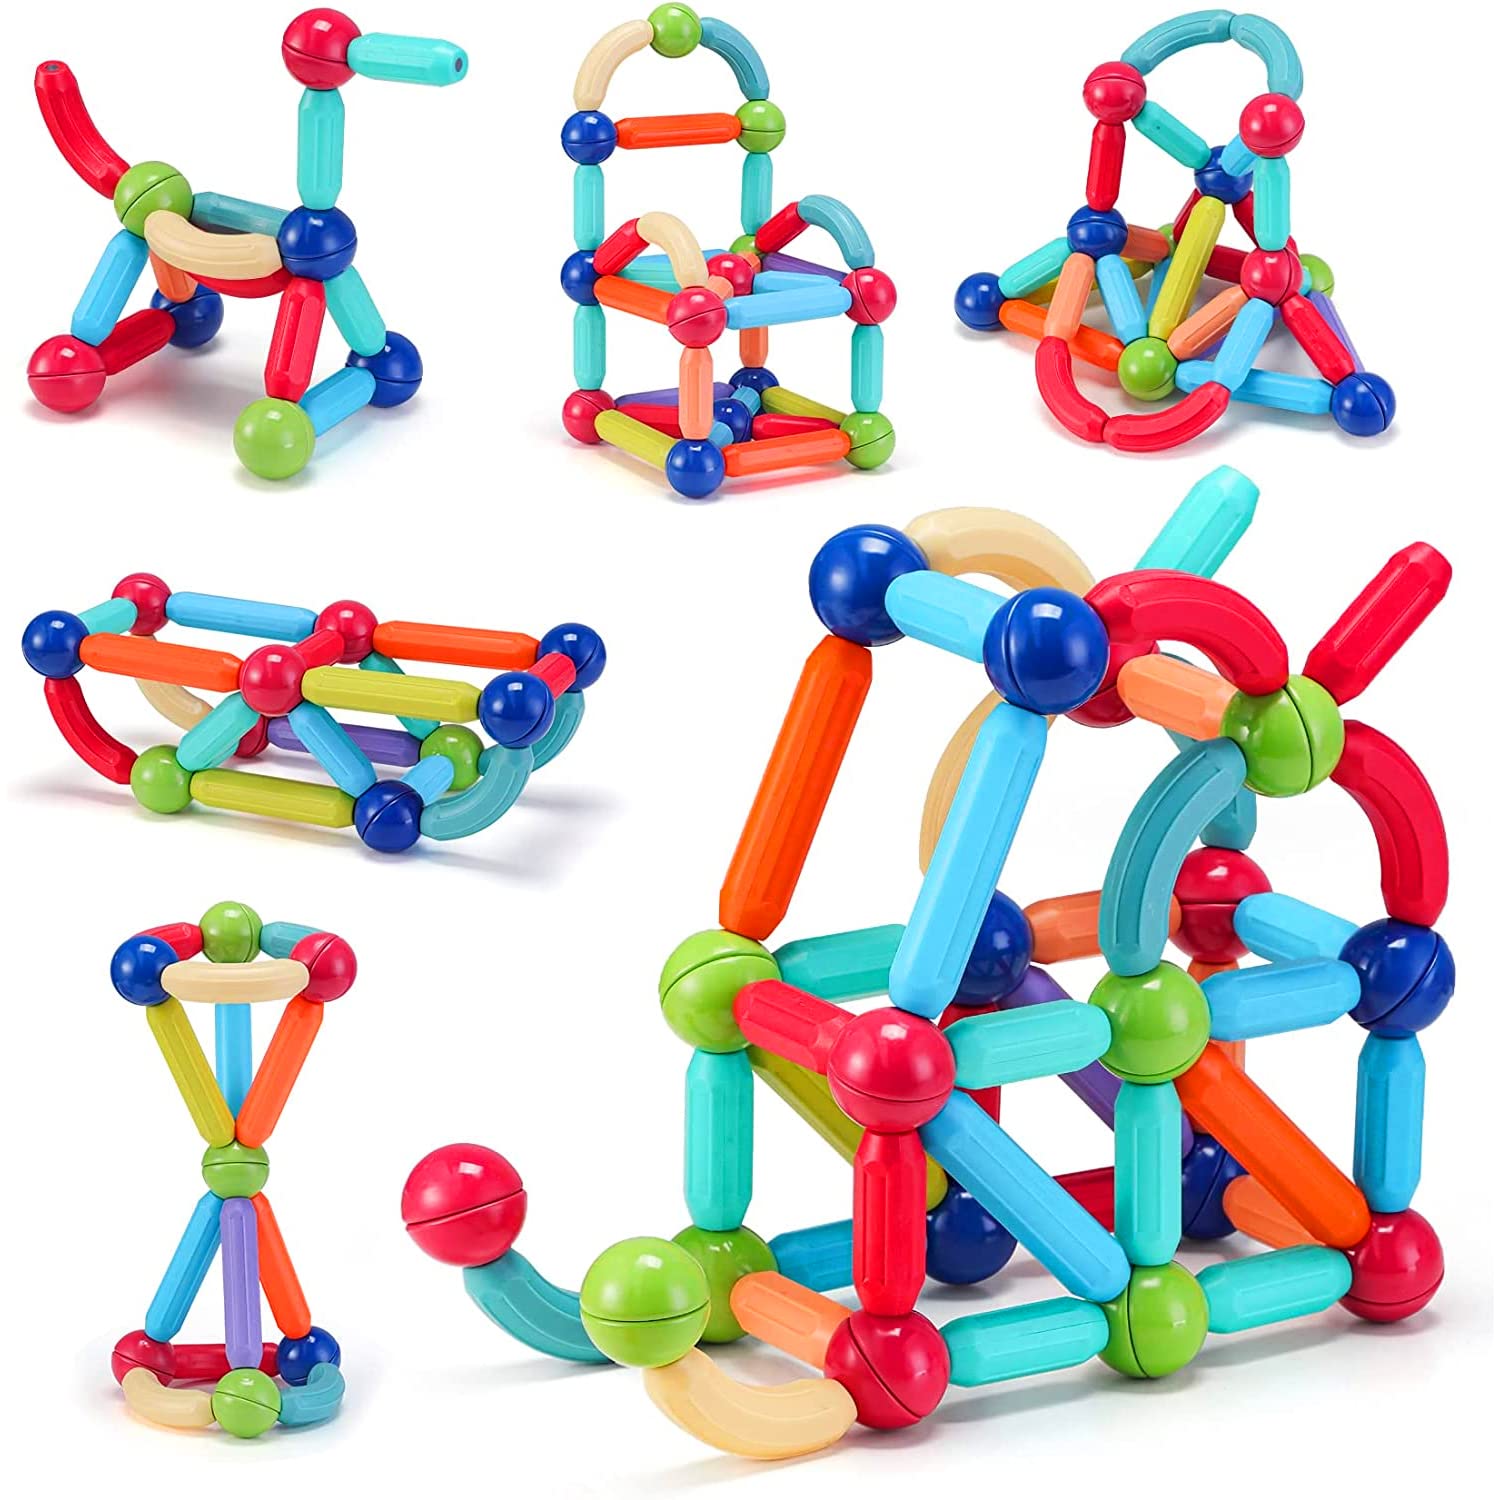 ToyDen Magnetic Sticks Building Blocks Set for Kids Age 3+ - Creative and Educational Construction Toy for Boys and Girls, Includes Magnetic Balls, Safe and Durable, STEM Learning - 64 Pcs